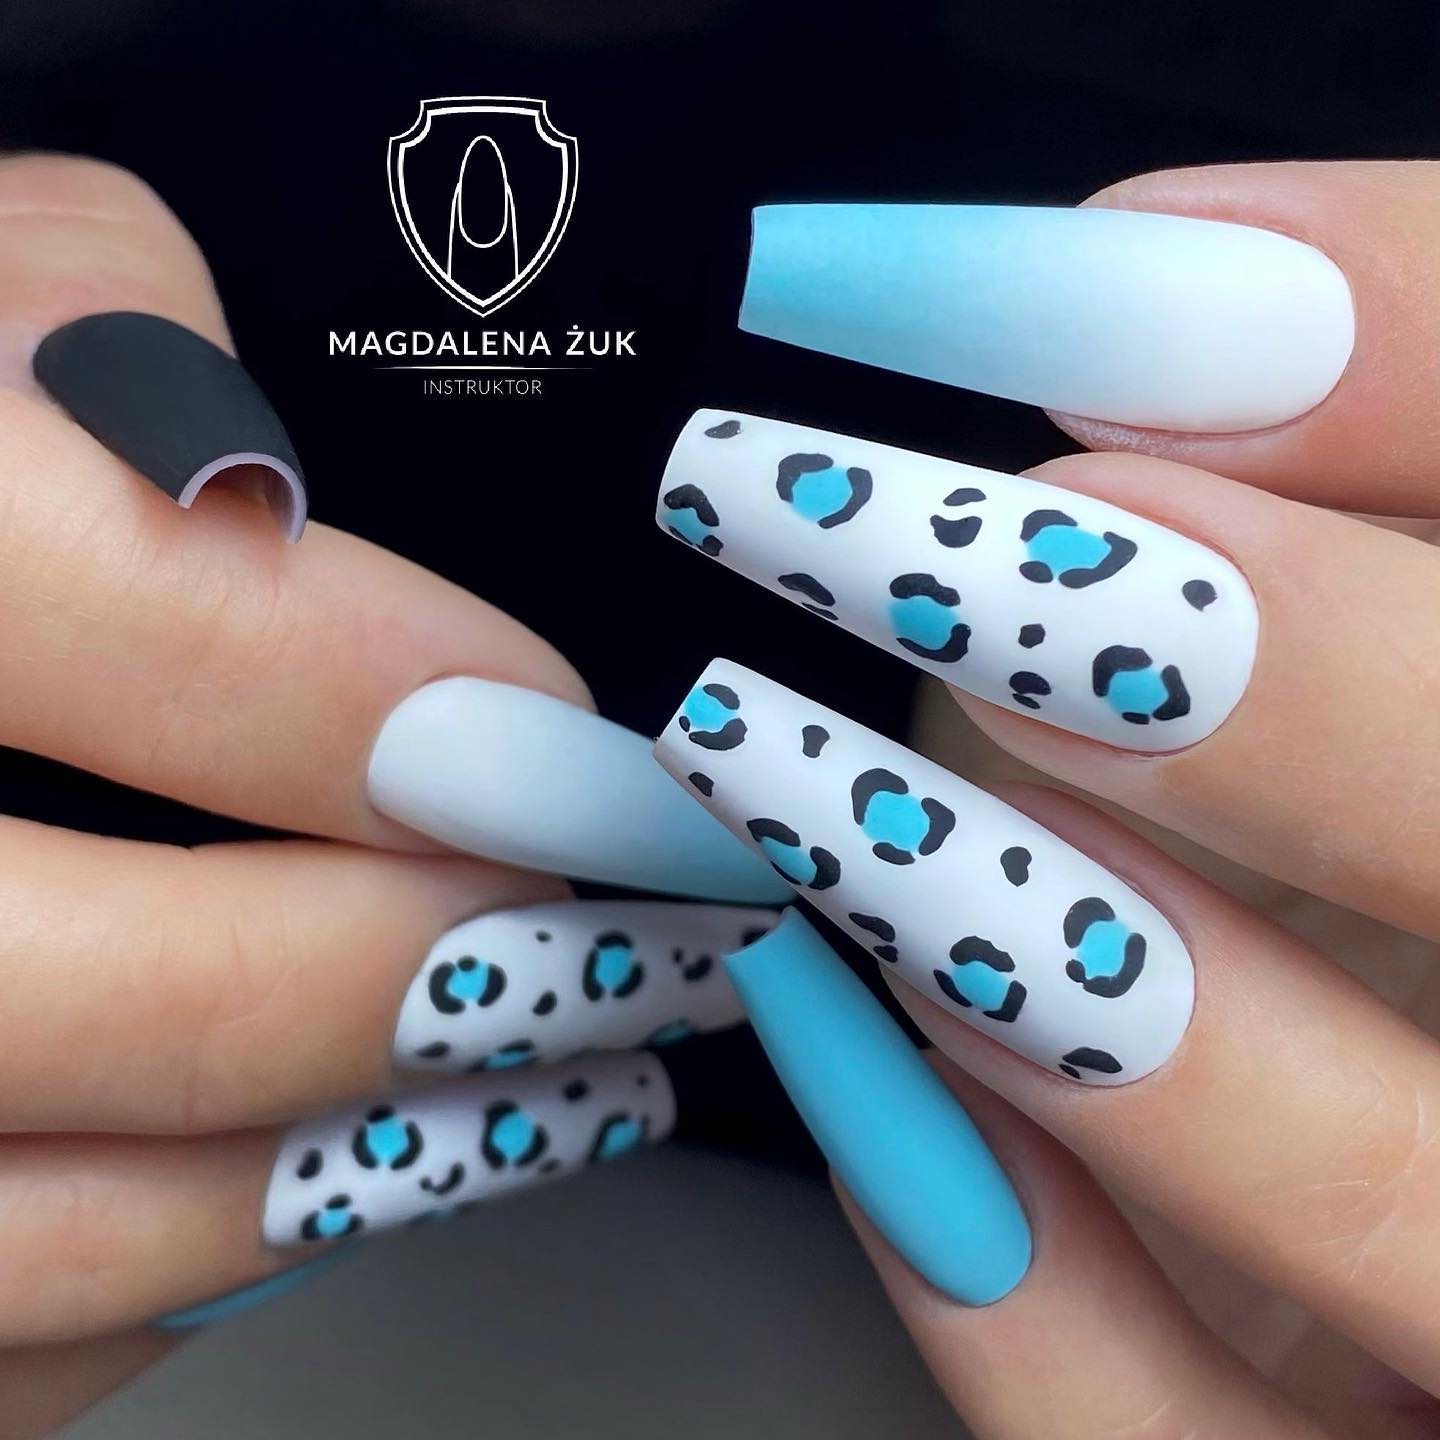 One of the most popular color combinations is definitely blue and white. They look so clean and neat. Plus, to take this great color combo to a different level, animal prints are ready and they rock. Let's show off your wild side!